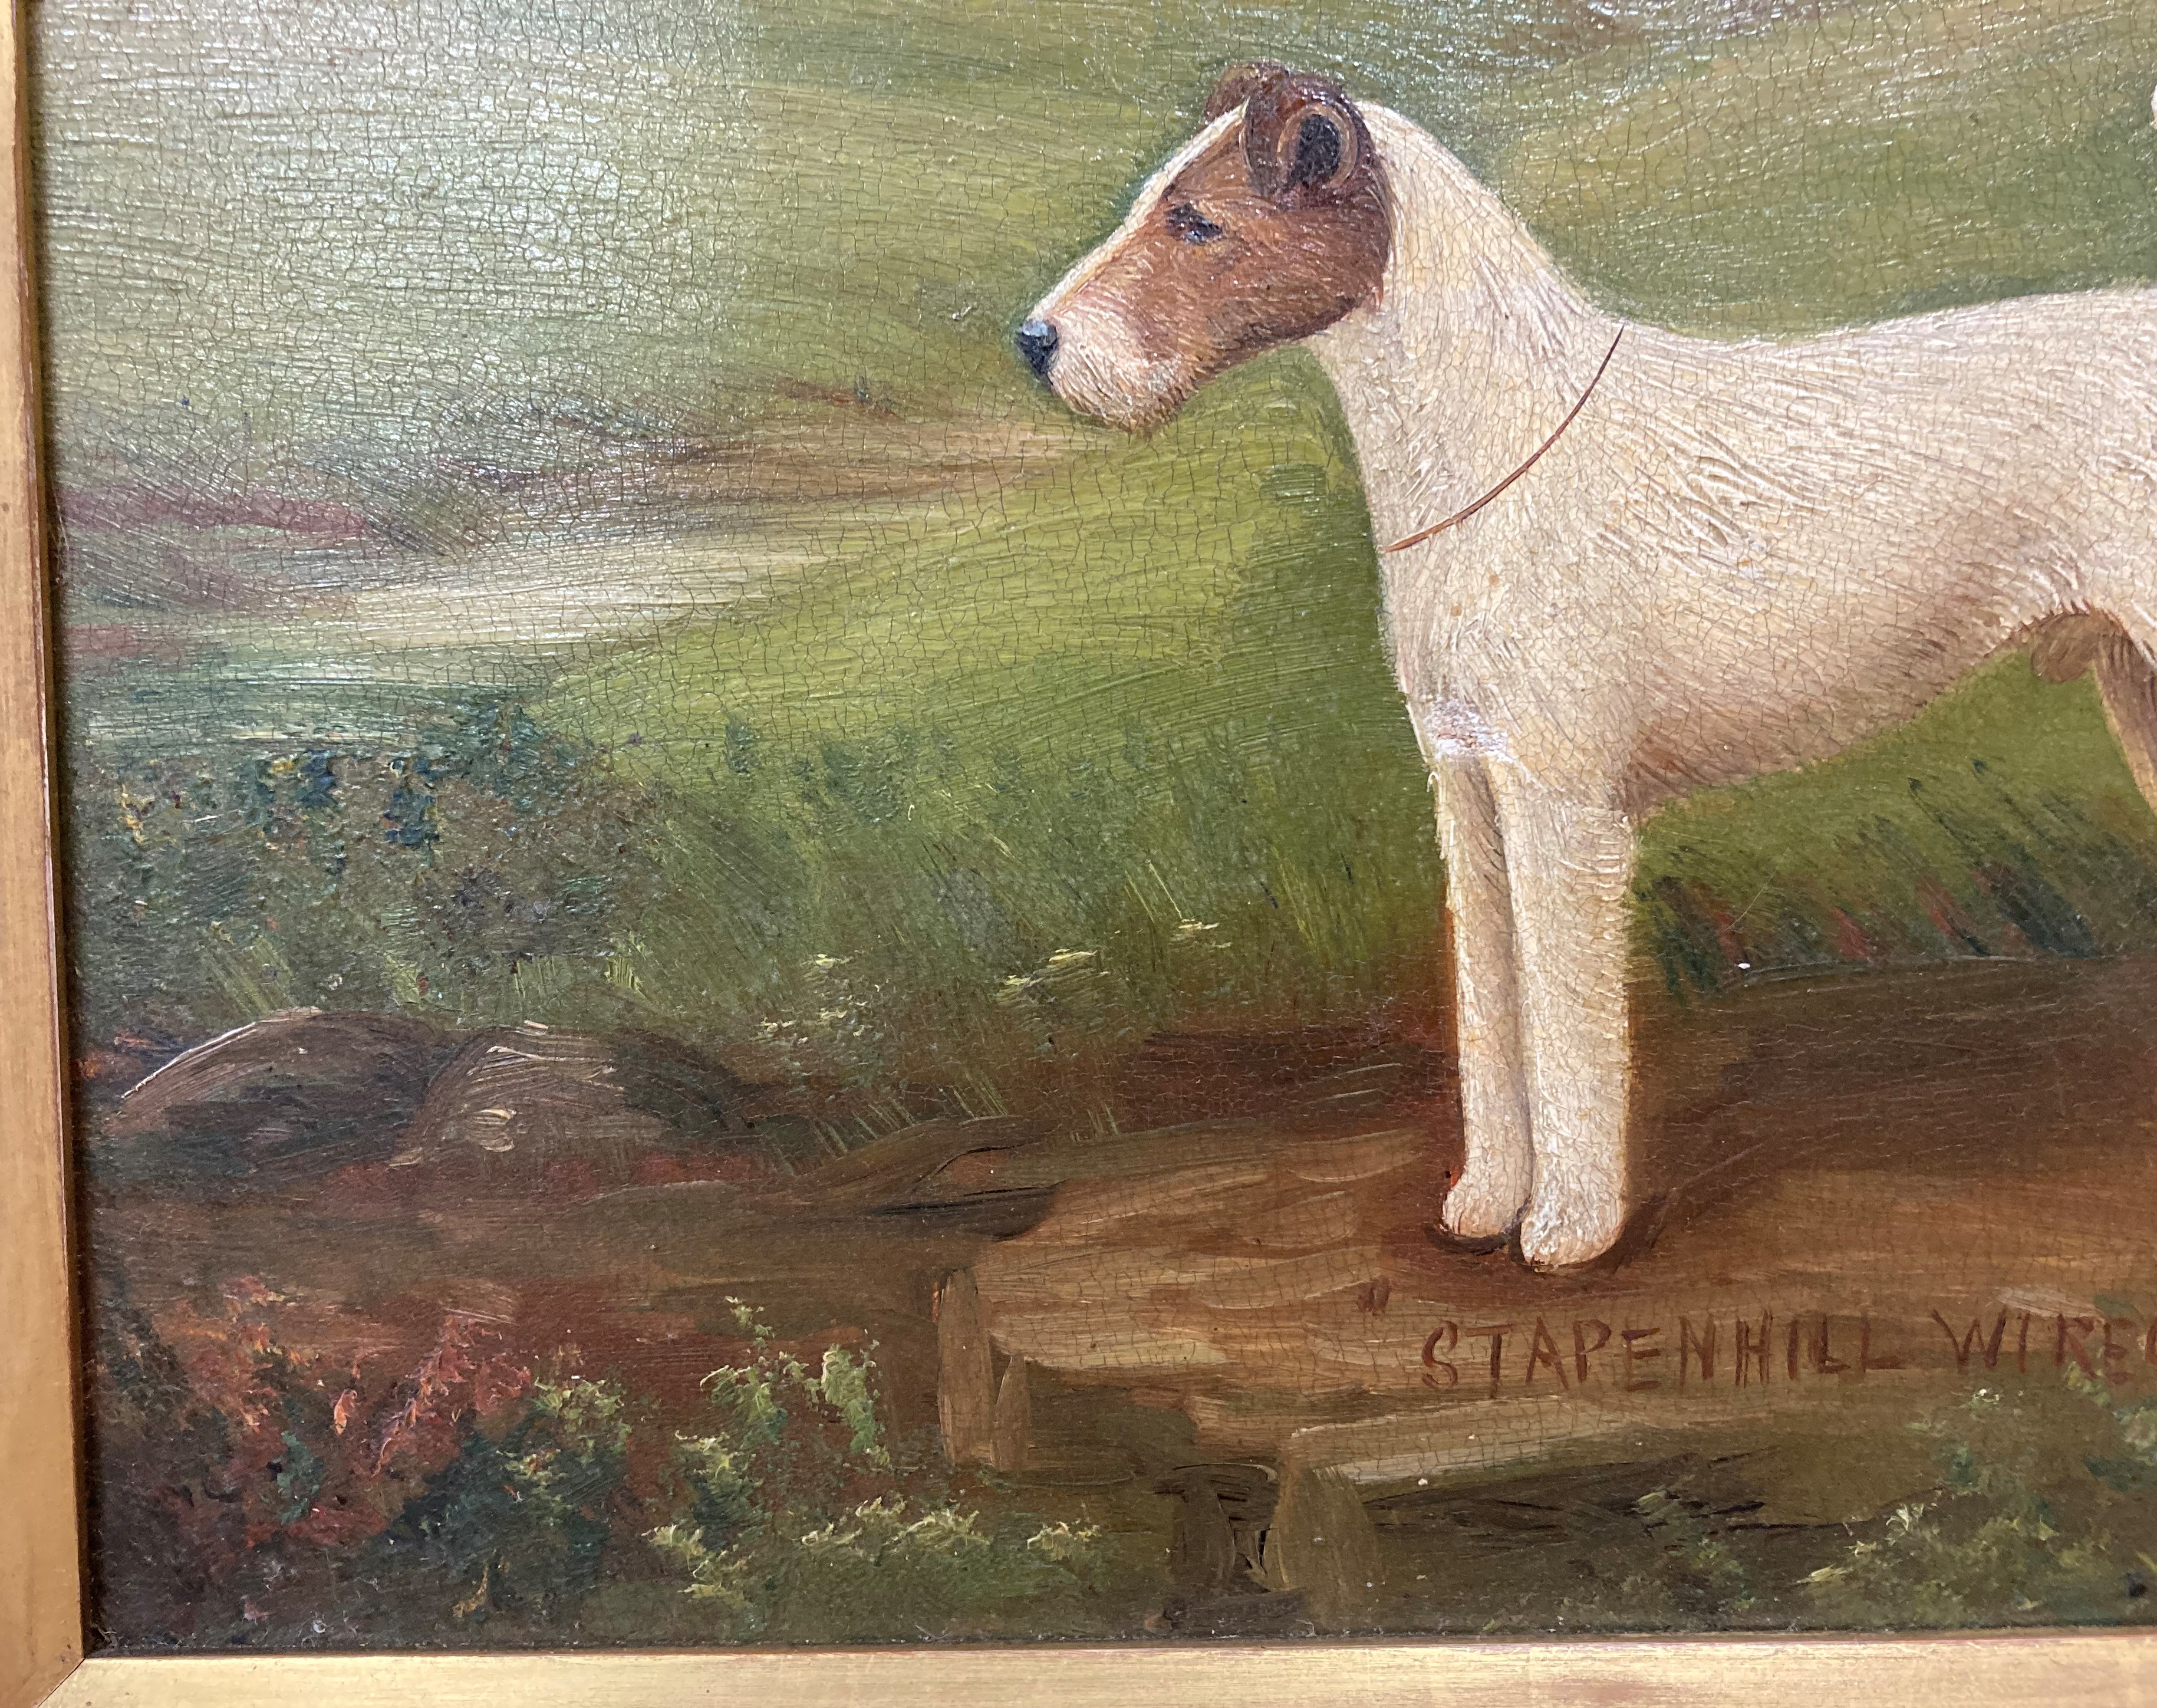 H Crowther 1923, 'Stapenhill Wiregirls Legacy', study of a fox terrier, oil on canvas, - Image 15 of 32